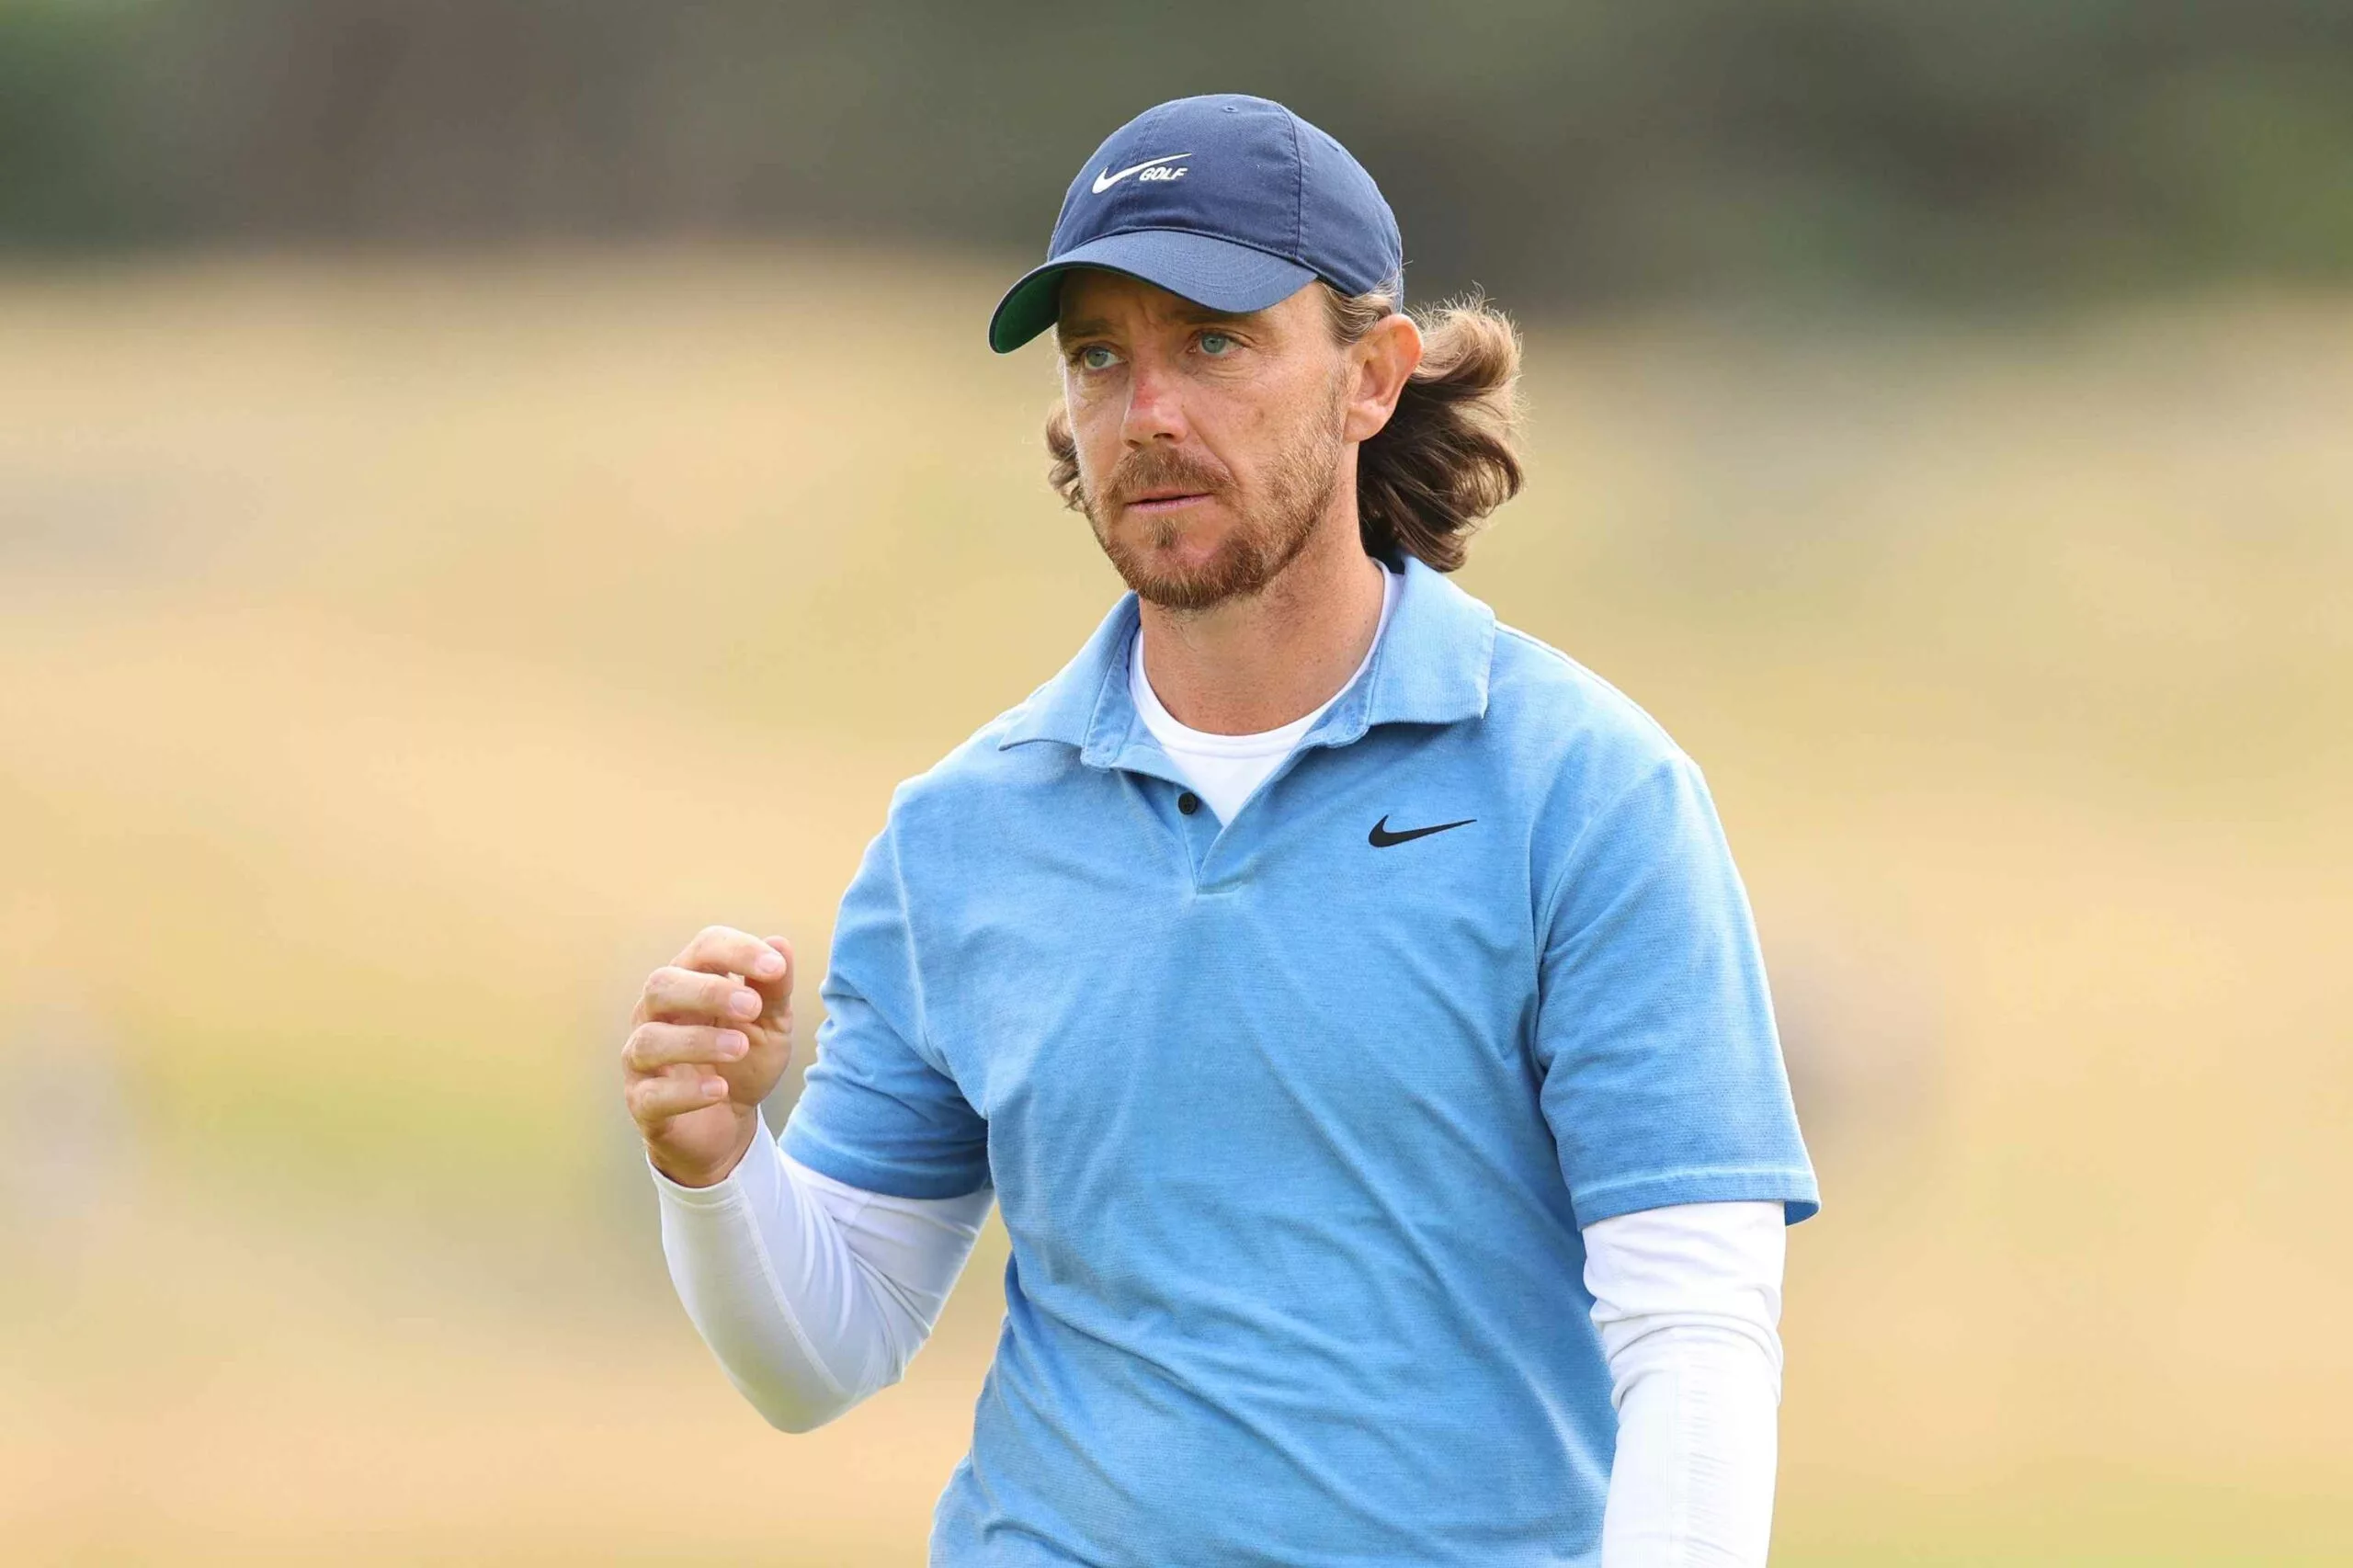 Tommy Fleetwood Makes $20 Million History at FedEx St. Jude Championship